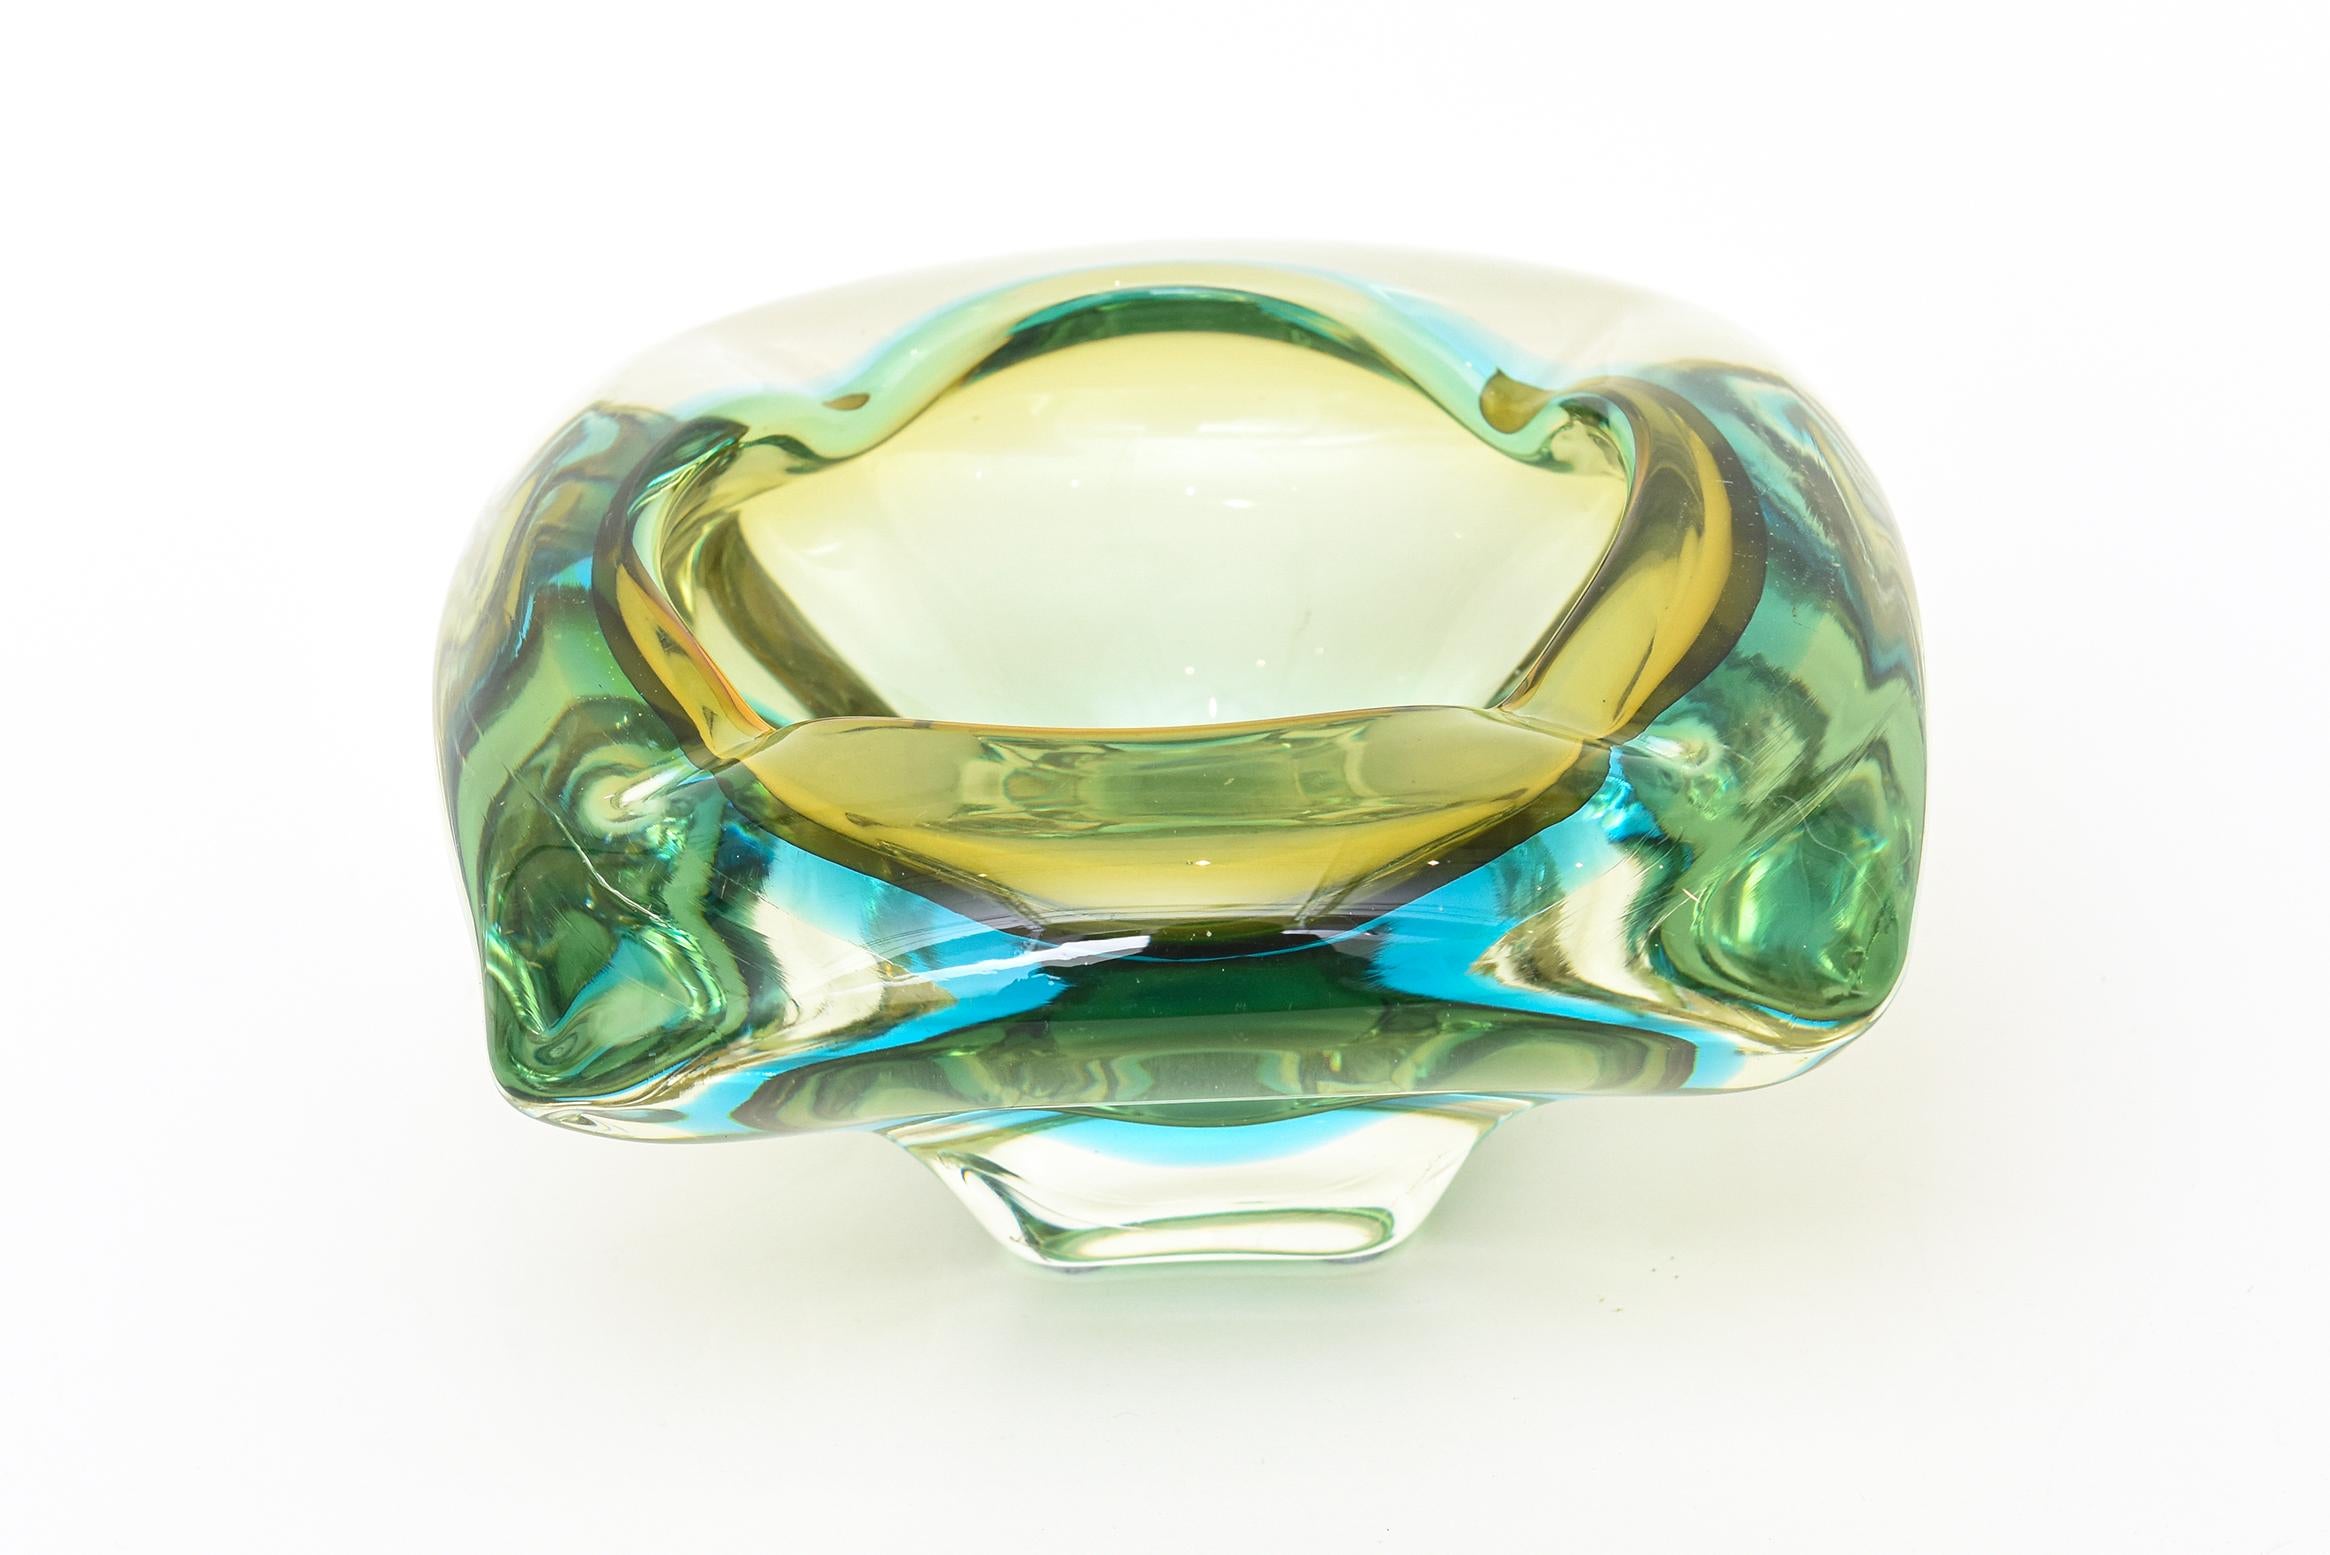 Flavio Poli Murano Sommerso Turquoise and Green Glass Bowl / Ashtray Vintage For Sale 2